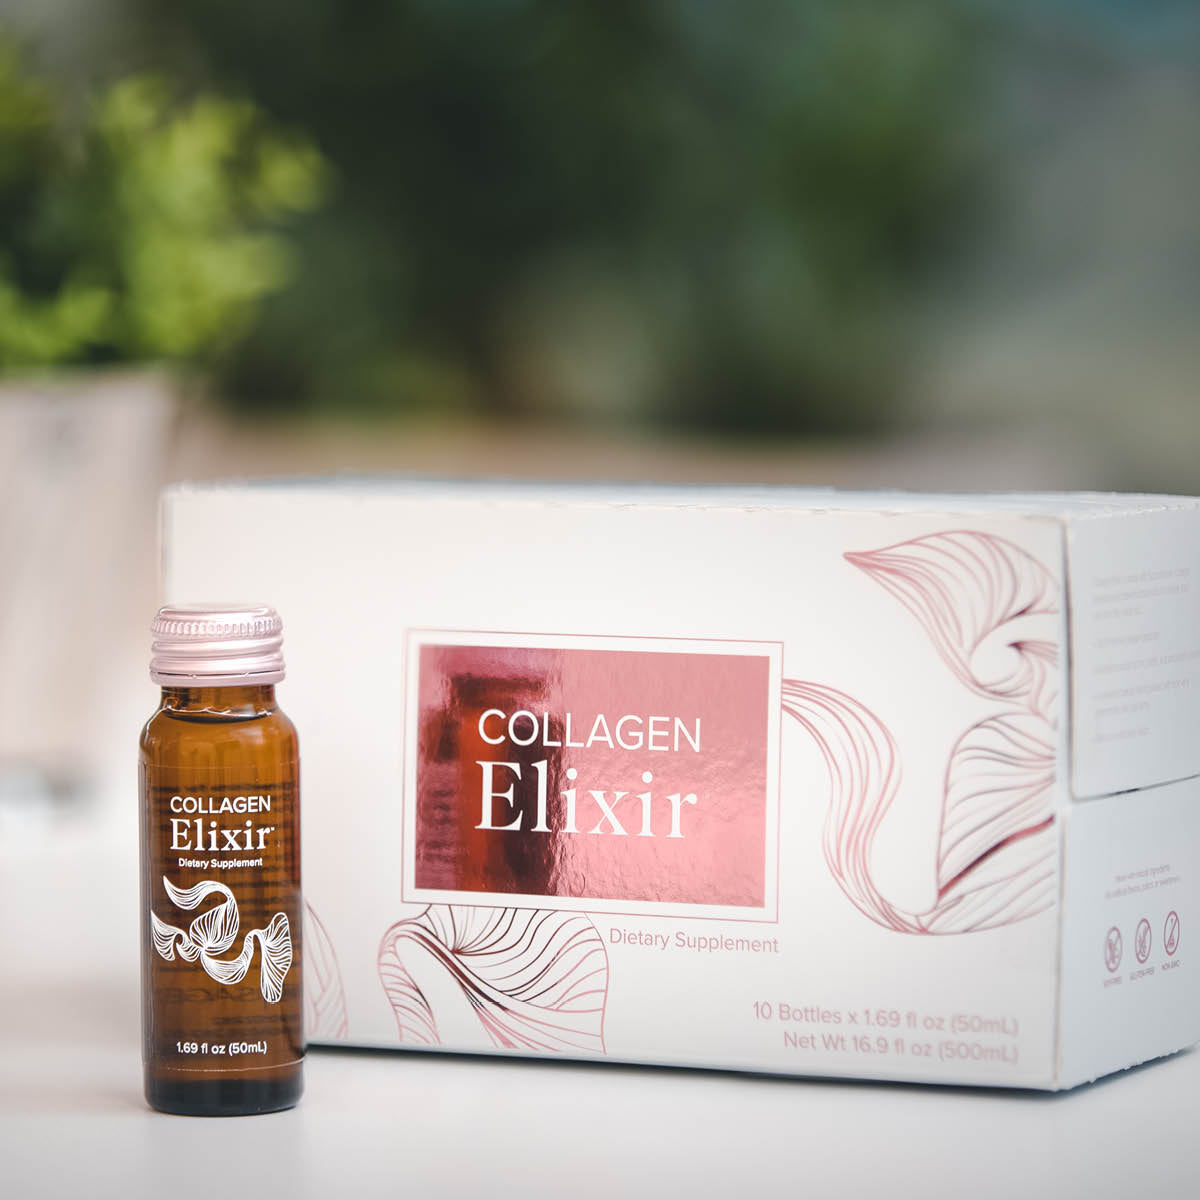 Collagen Elixir 3 packs with 30 bottles of 50ml each for 1 month